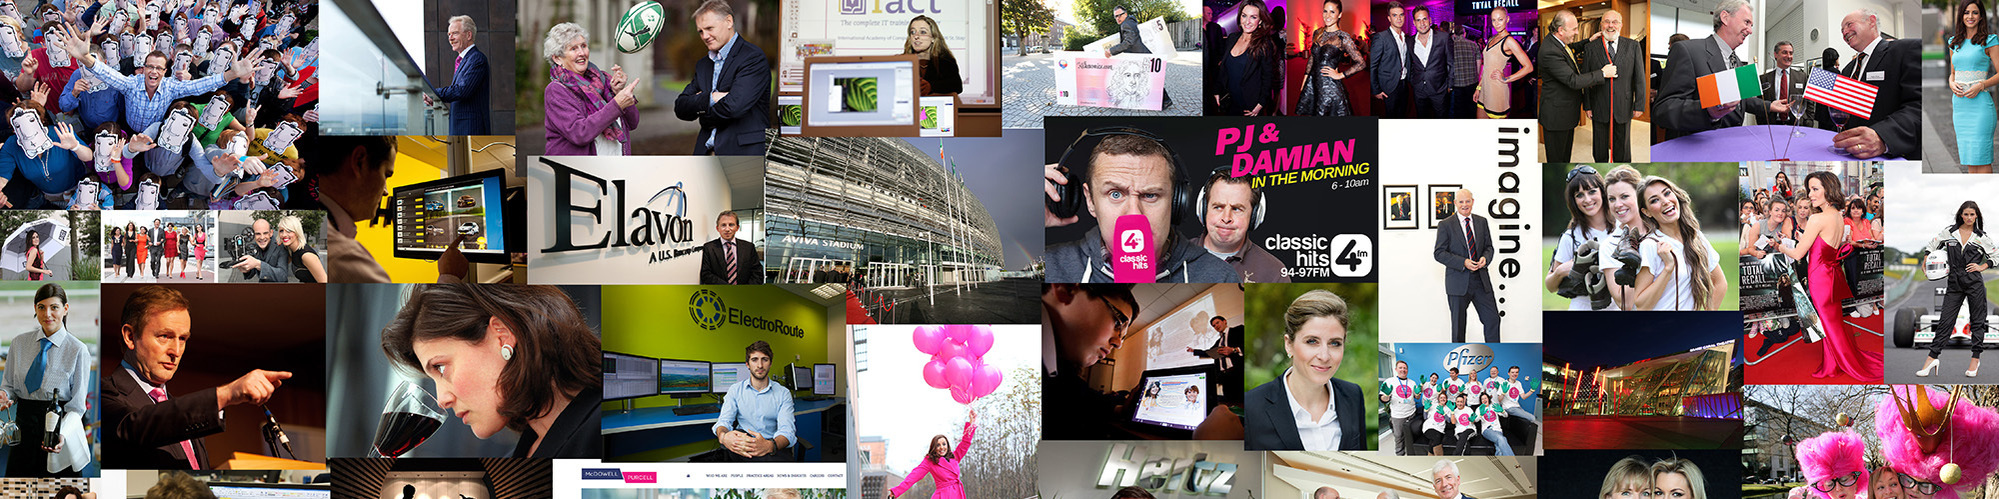 Collage of images for professional photographer 1IMAGE. Press PR Photocalls, headshots, live event photography, food photography, corporate photography www.1image.ie